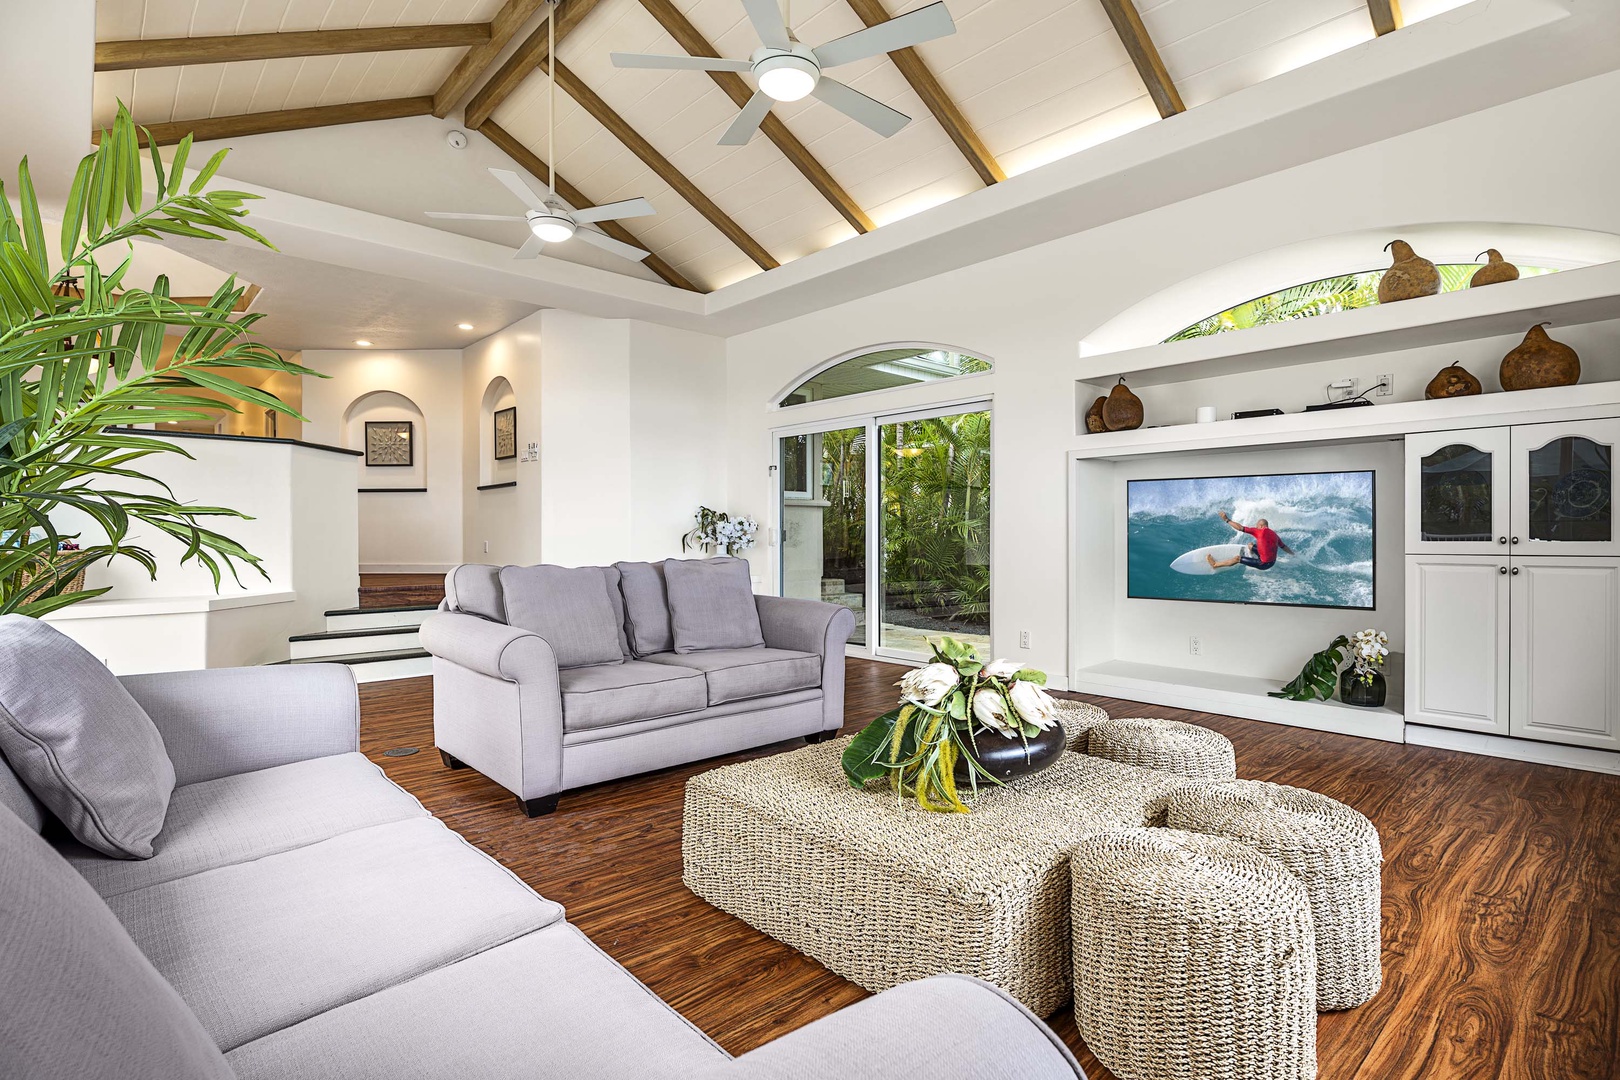 Kailua-Kona Vacation Rentals, Honu Hale - Vaulted ceiling with 55in smart TV make this space that much more inviting